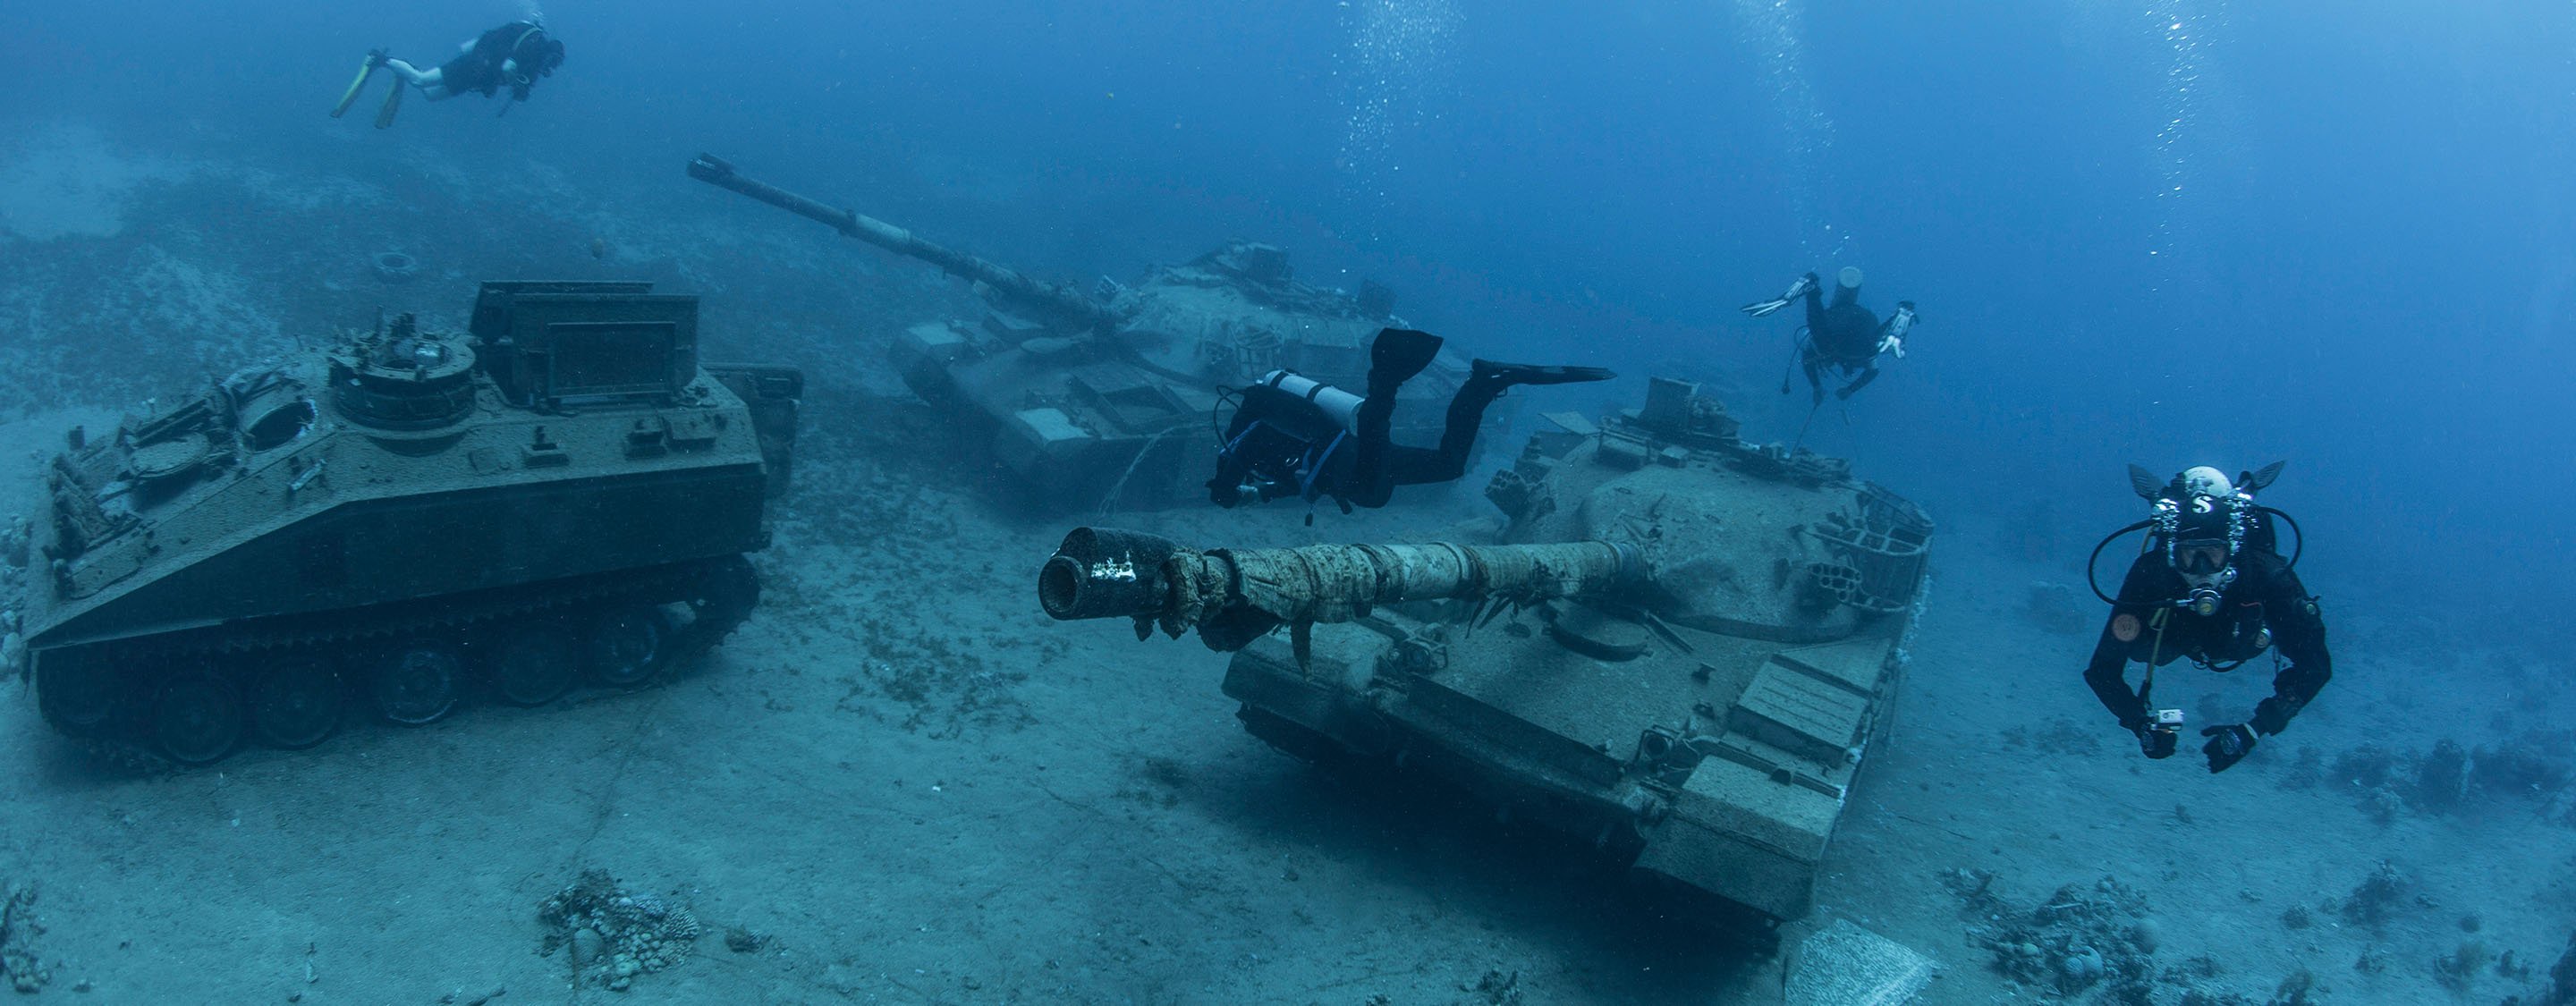 Diving in Jordan in Aqaba, where under water there are armored vehicles and tanks and other military equipment